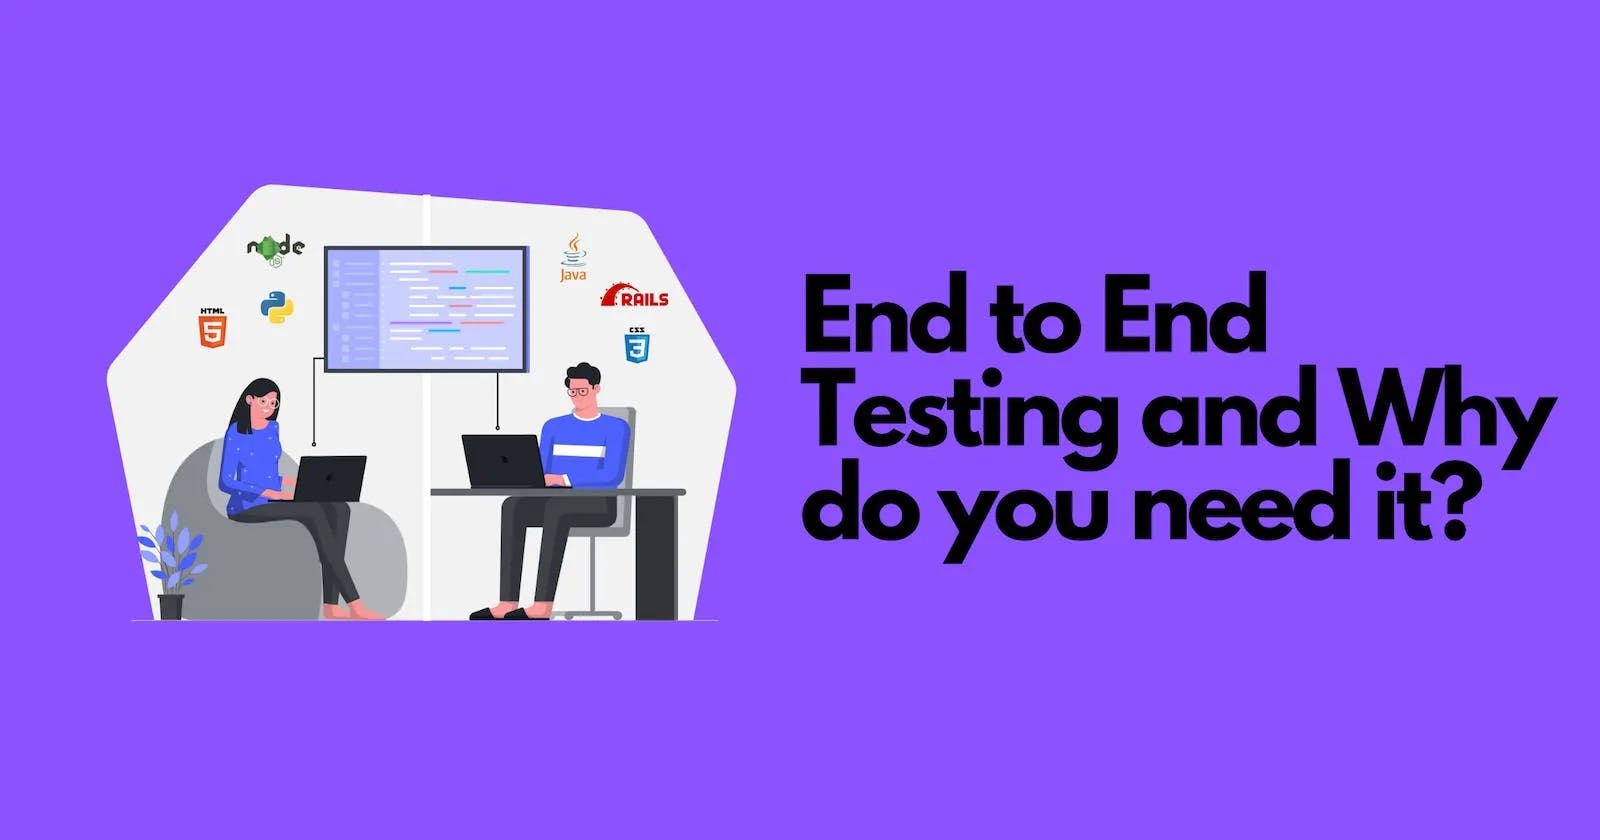 Cover Image for What is End to End Testing and Why do you need it?